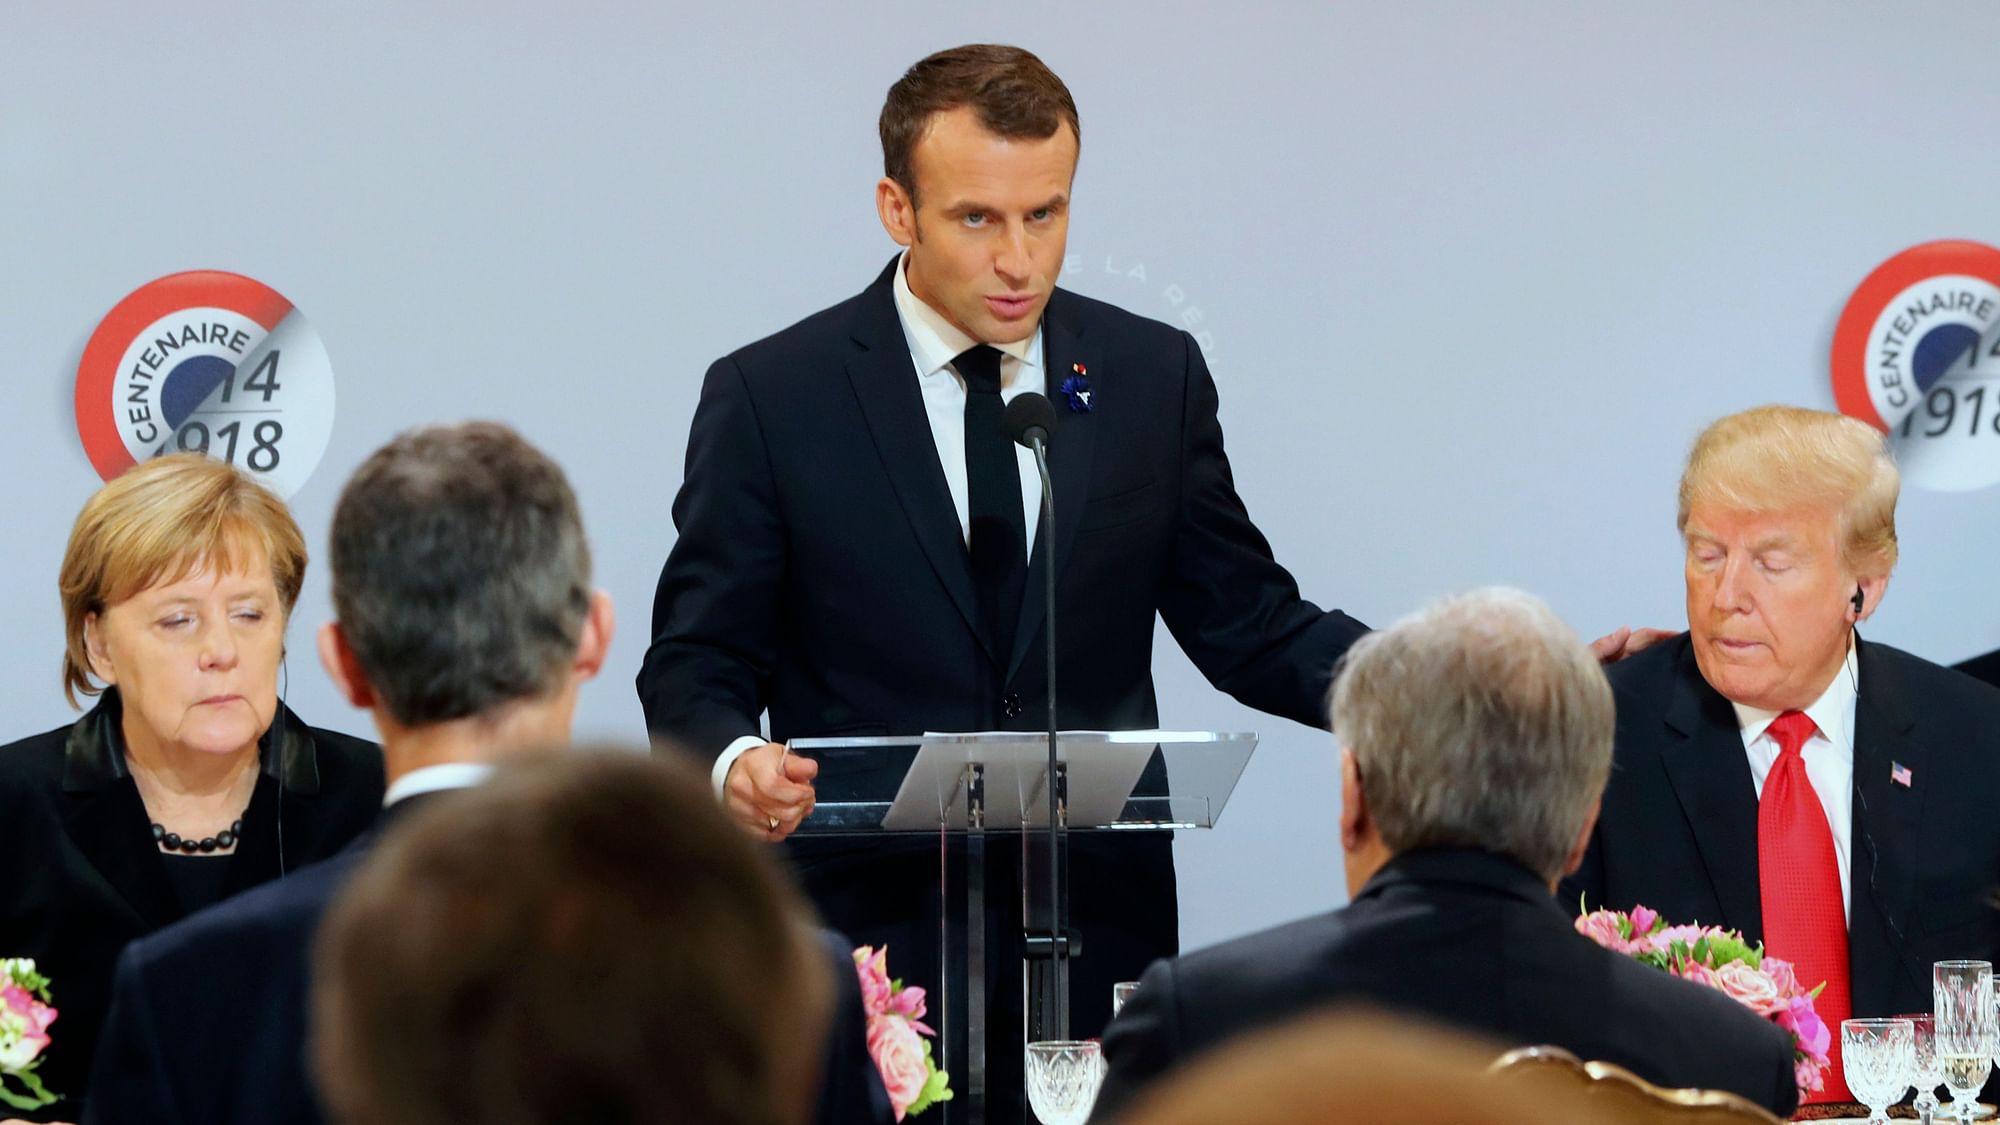 Macron said applying international definition of anti-Semitism will help police forces, magistrates and teachers.